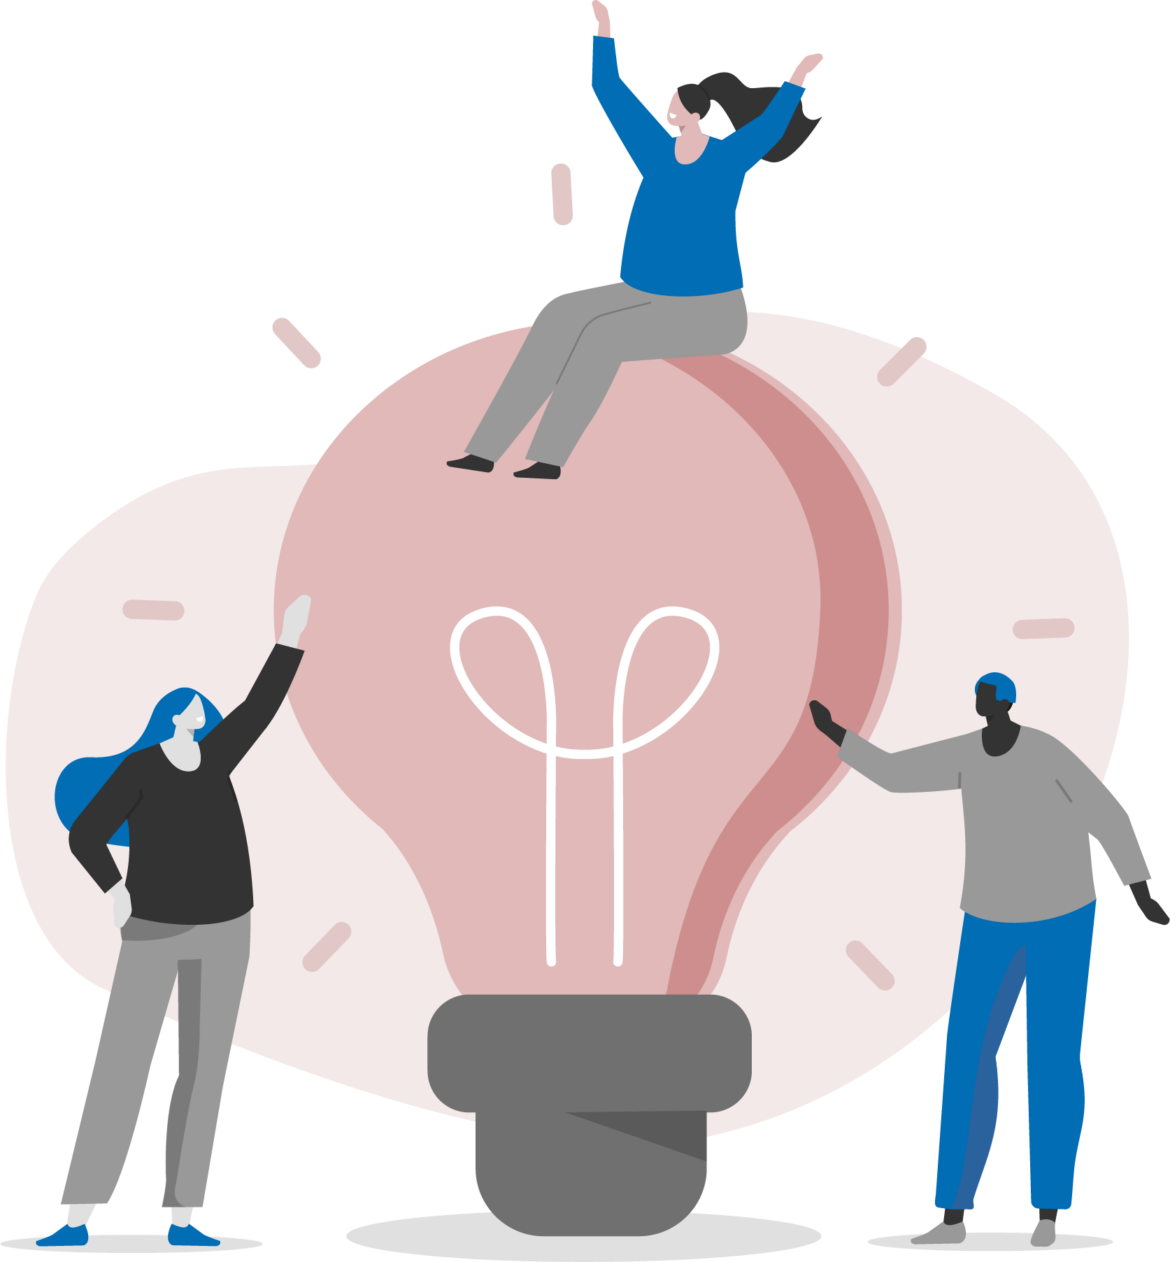 Vector illustration of a pink light bulb, one character sat on top with their arms in the air, and two characters either side pointing at the light bulb with their arm stretched out.